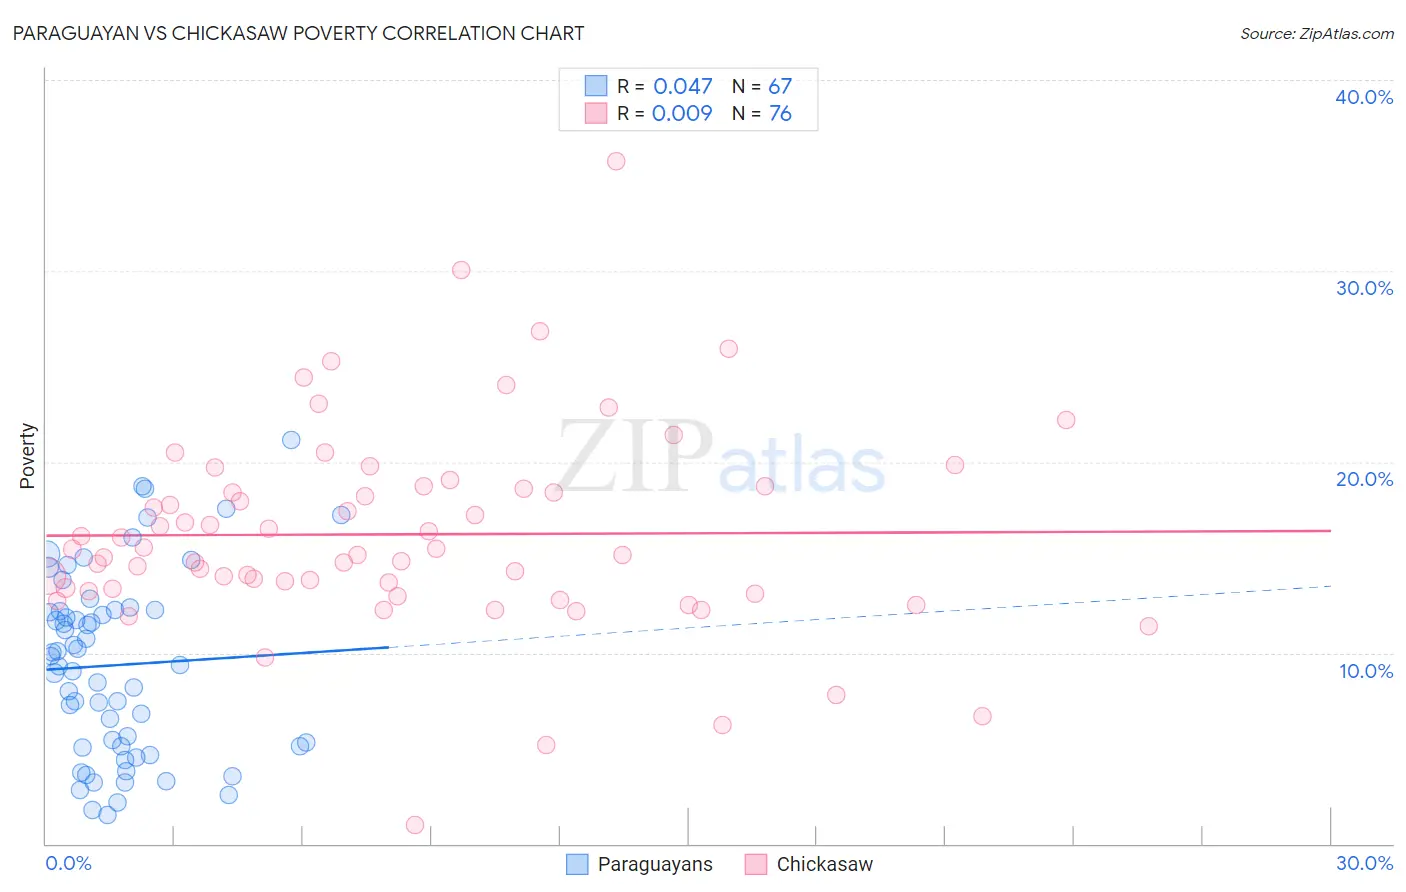 Paraguayan vs Chickasaw Poverty